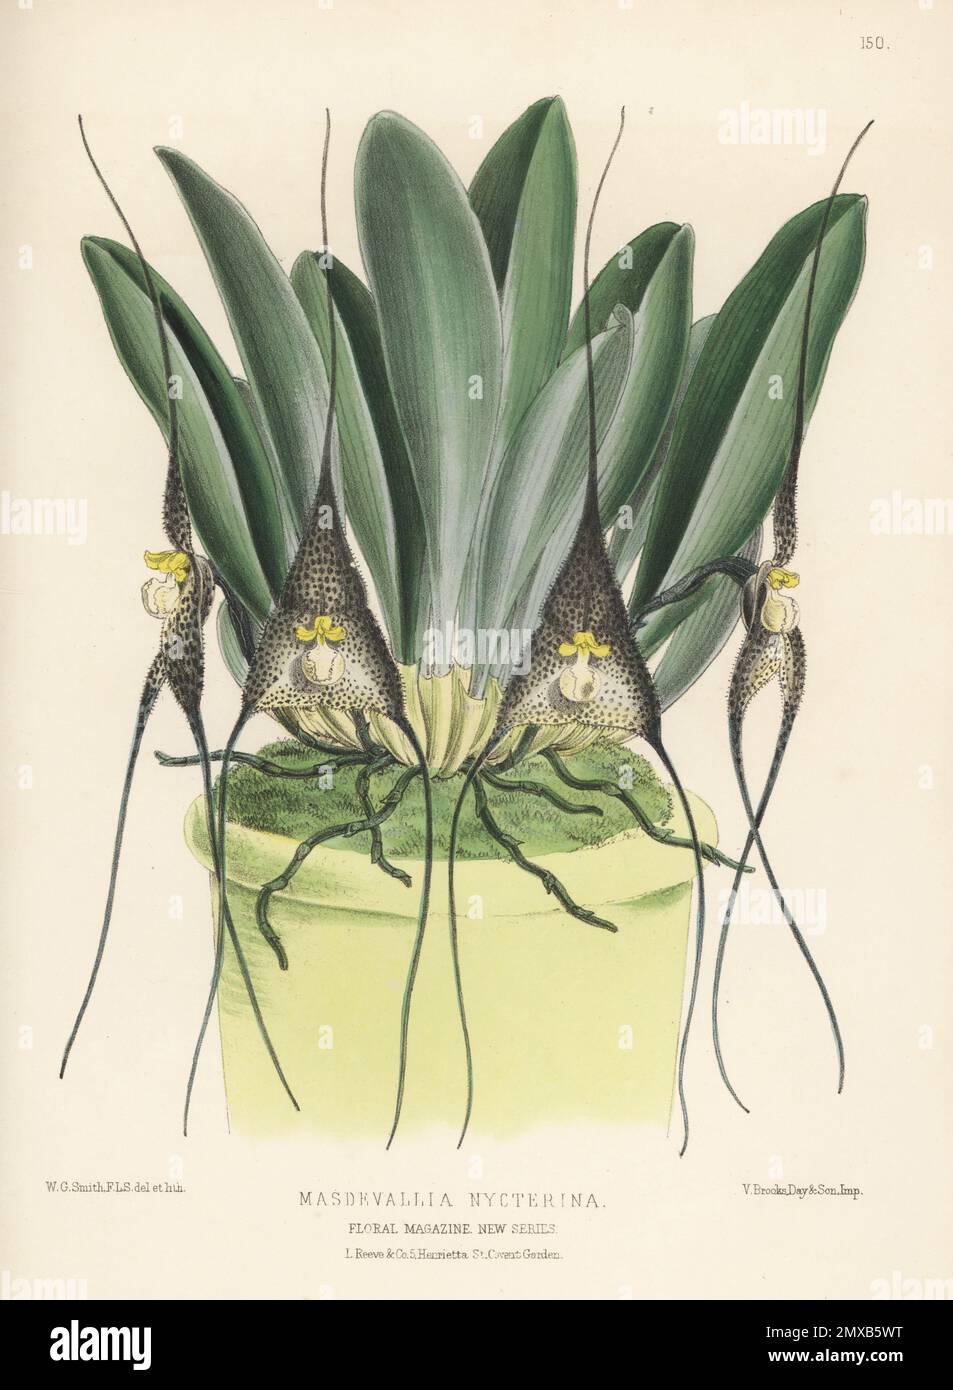 Dracula nycterina orchid in pot, native to Colombia. Introduced to Europe by Linden from New Granada. As Masdevallia nycterina. Handcolored botanical illustration drawn and lithographed by Worthington George Smith from Henry Honywood Dombrain's Floral Magazine, New Series, Volume 4, L. Reeve, London, 1875. Lithograph printed by Vincent Brooks, Day & Son. Stock Photo